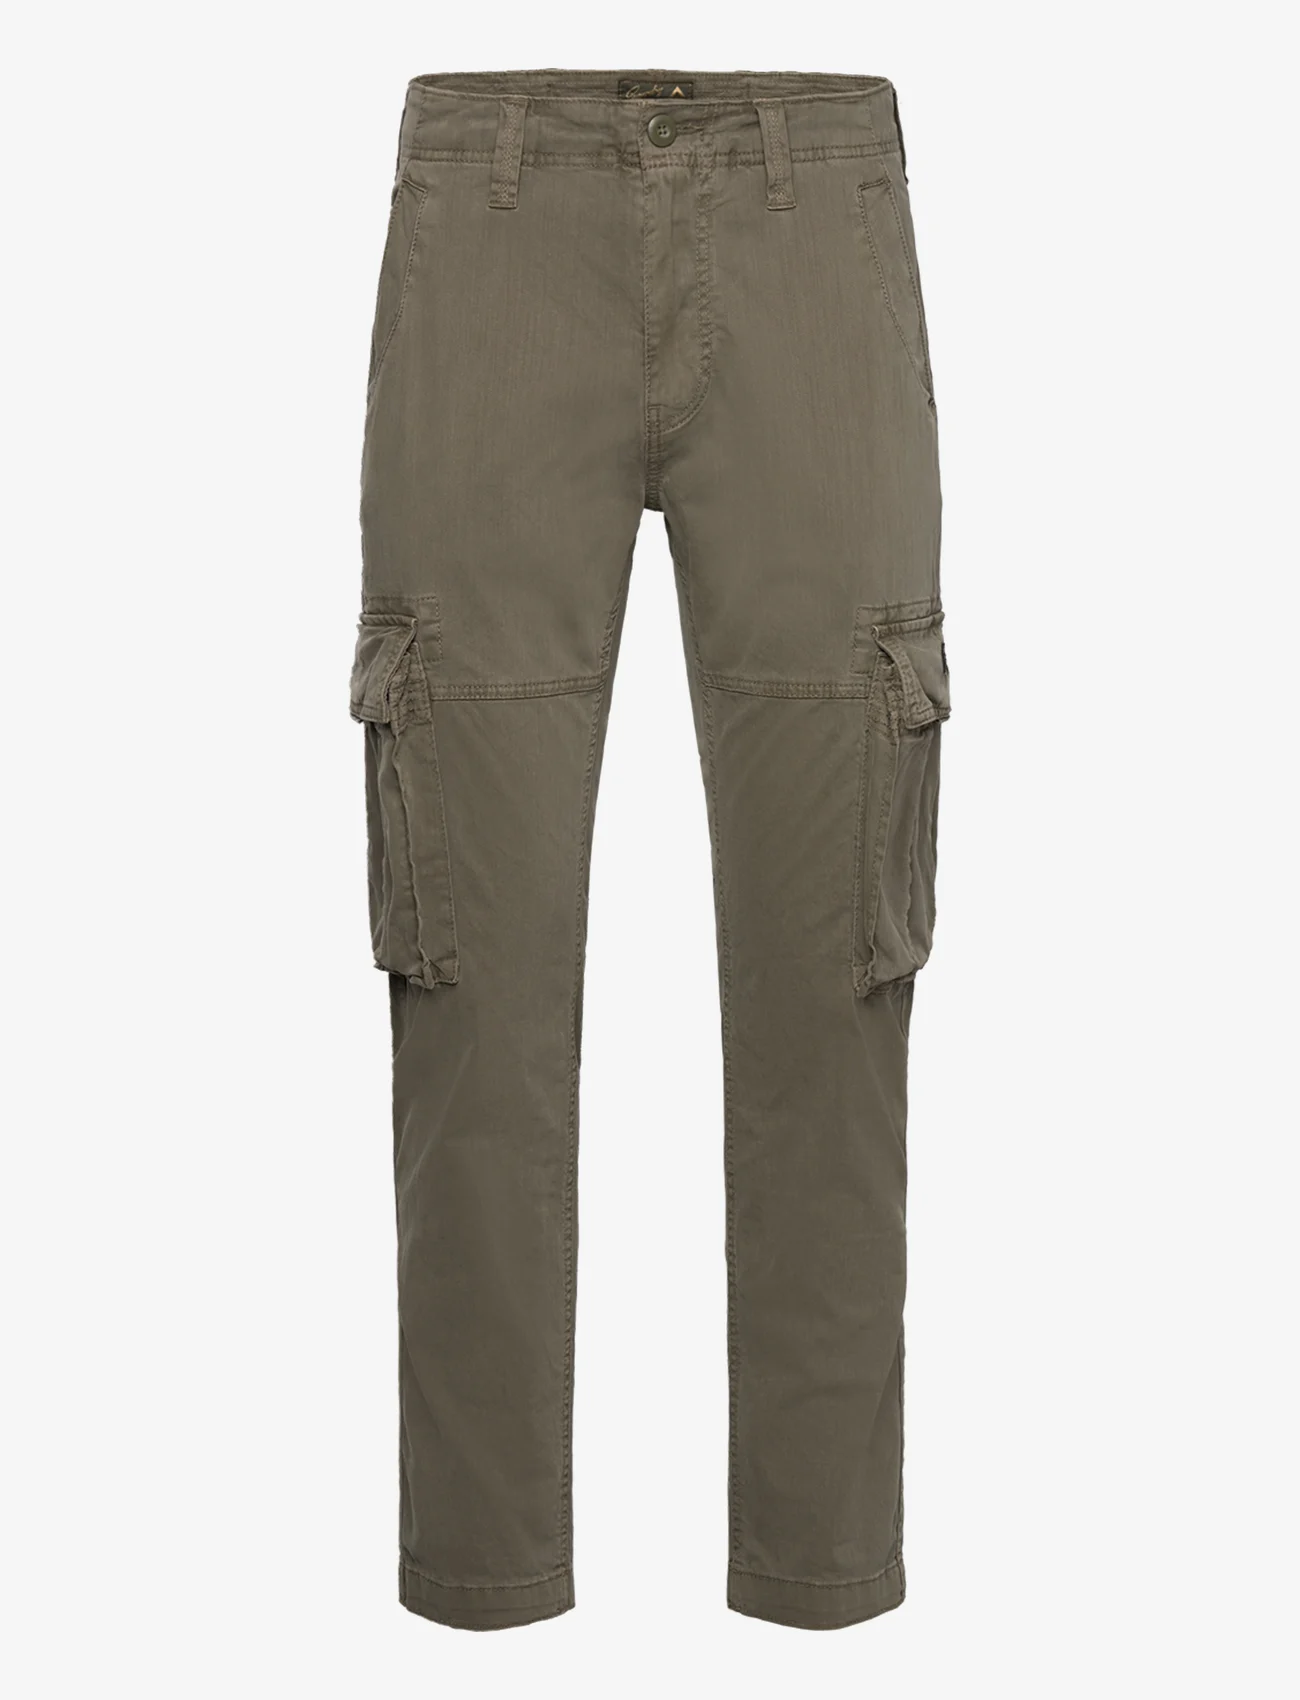 Superdry - CORE CARGO PANT - cargo-housut - chive green - 0